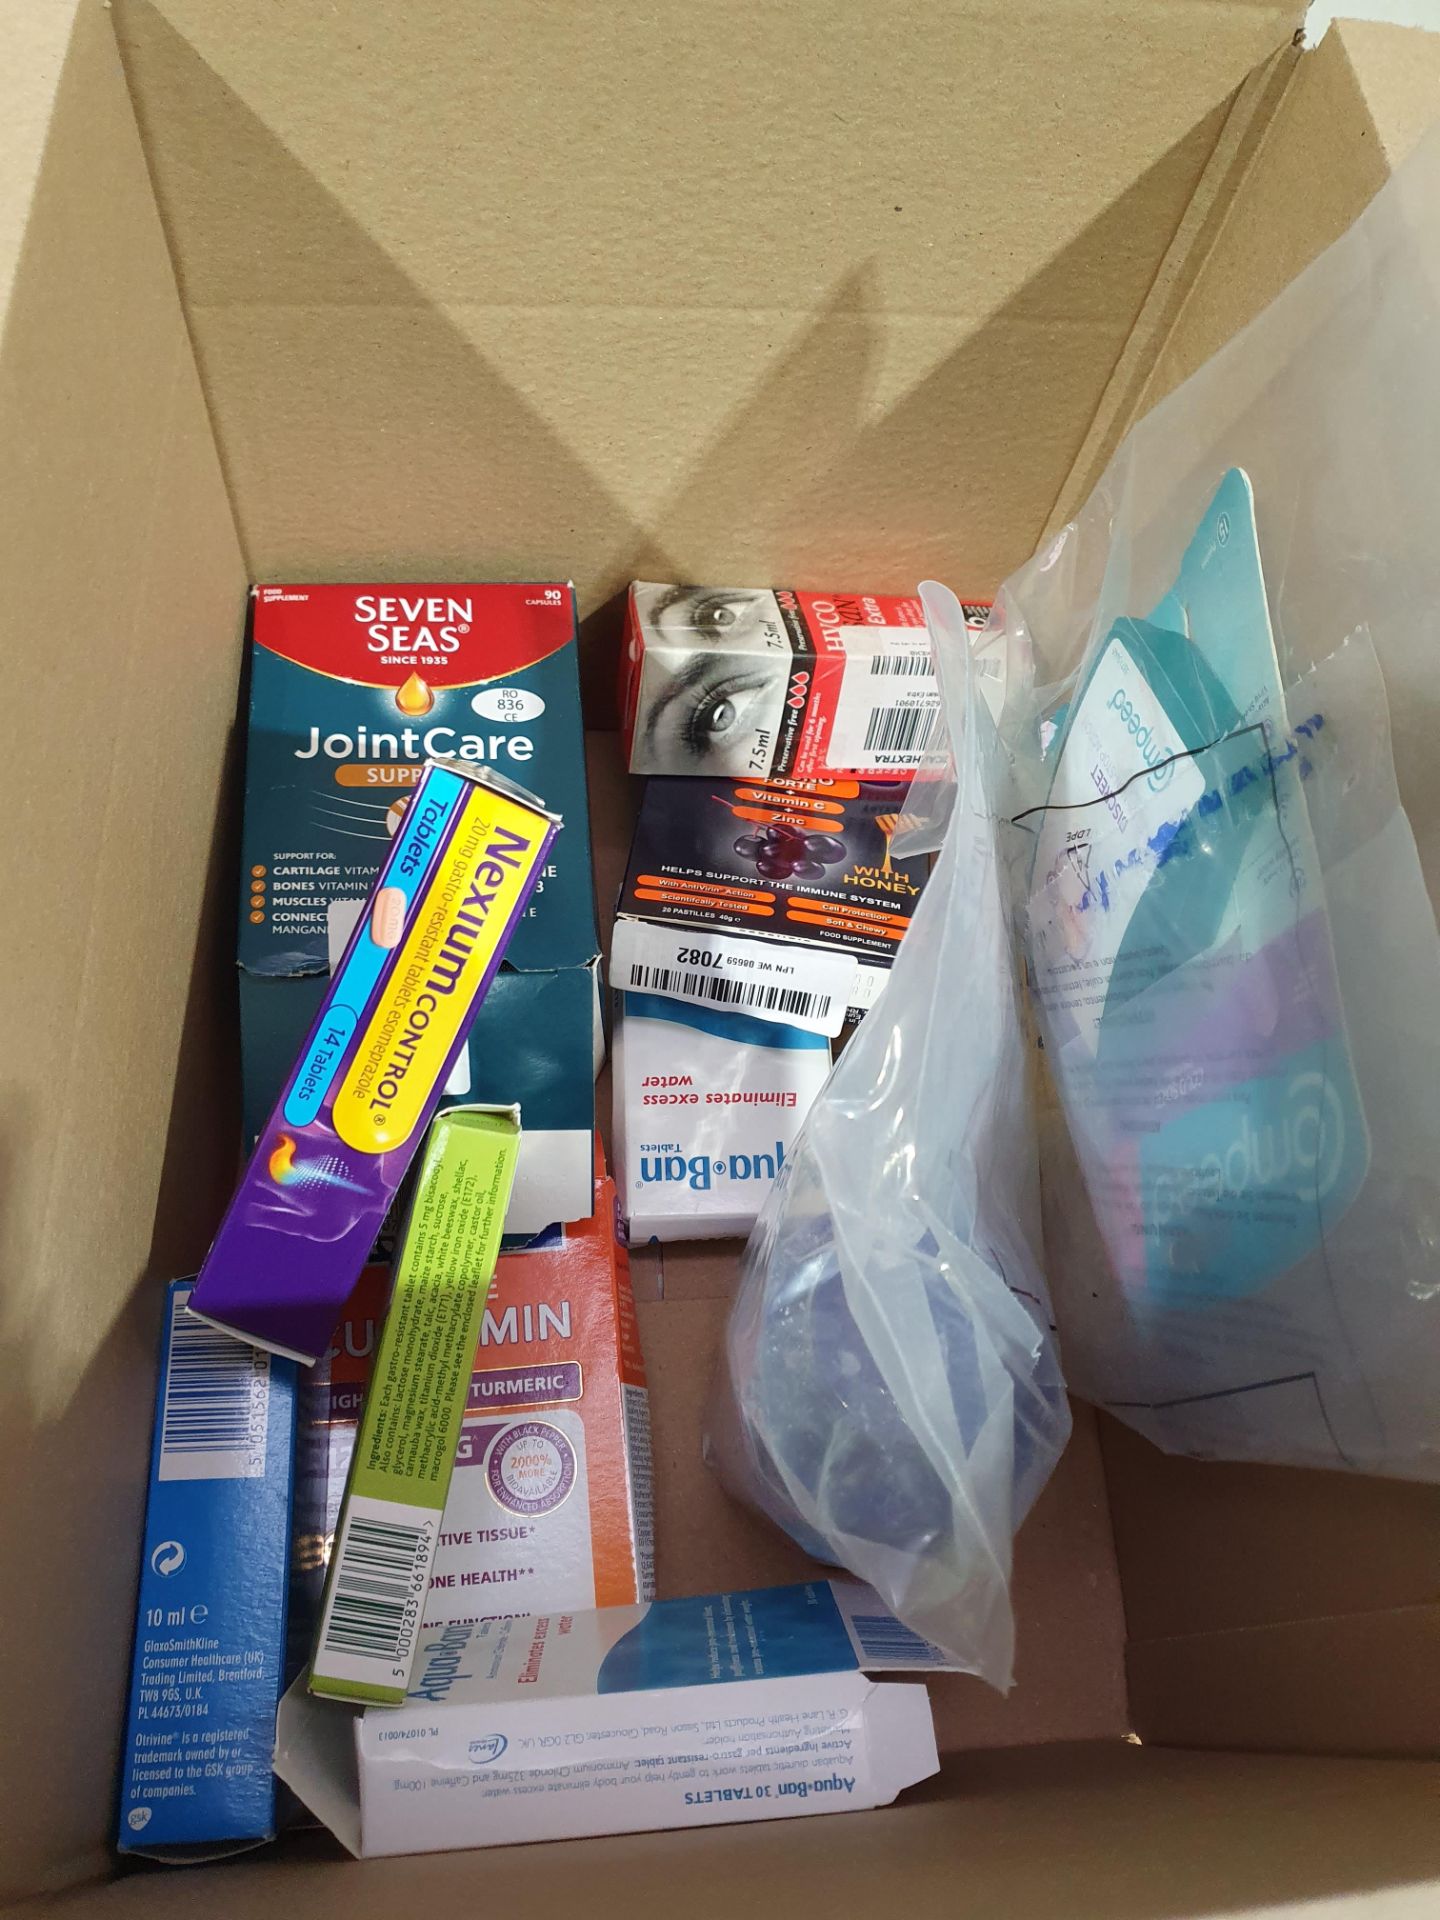 X 11 ITEMS TO INCLUDE SEVEN SEAS JOINT CARE, EYEDROPS, NEXUM, COMPEED AND MORE Condition